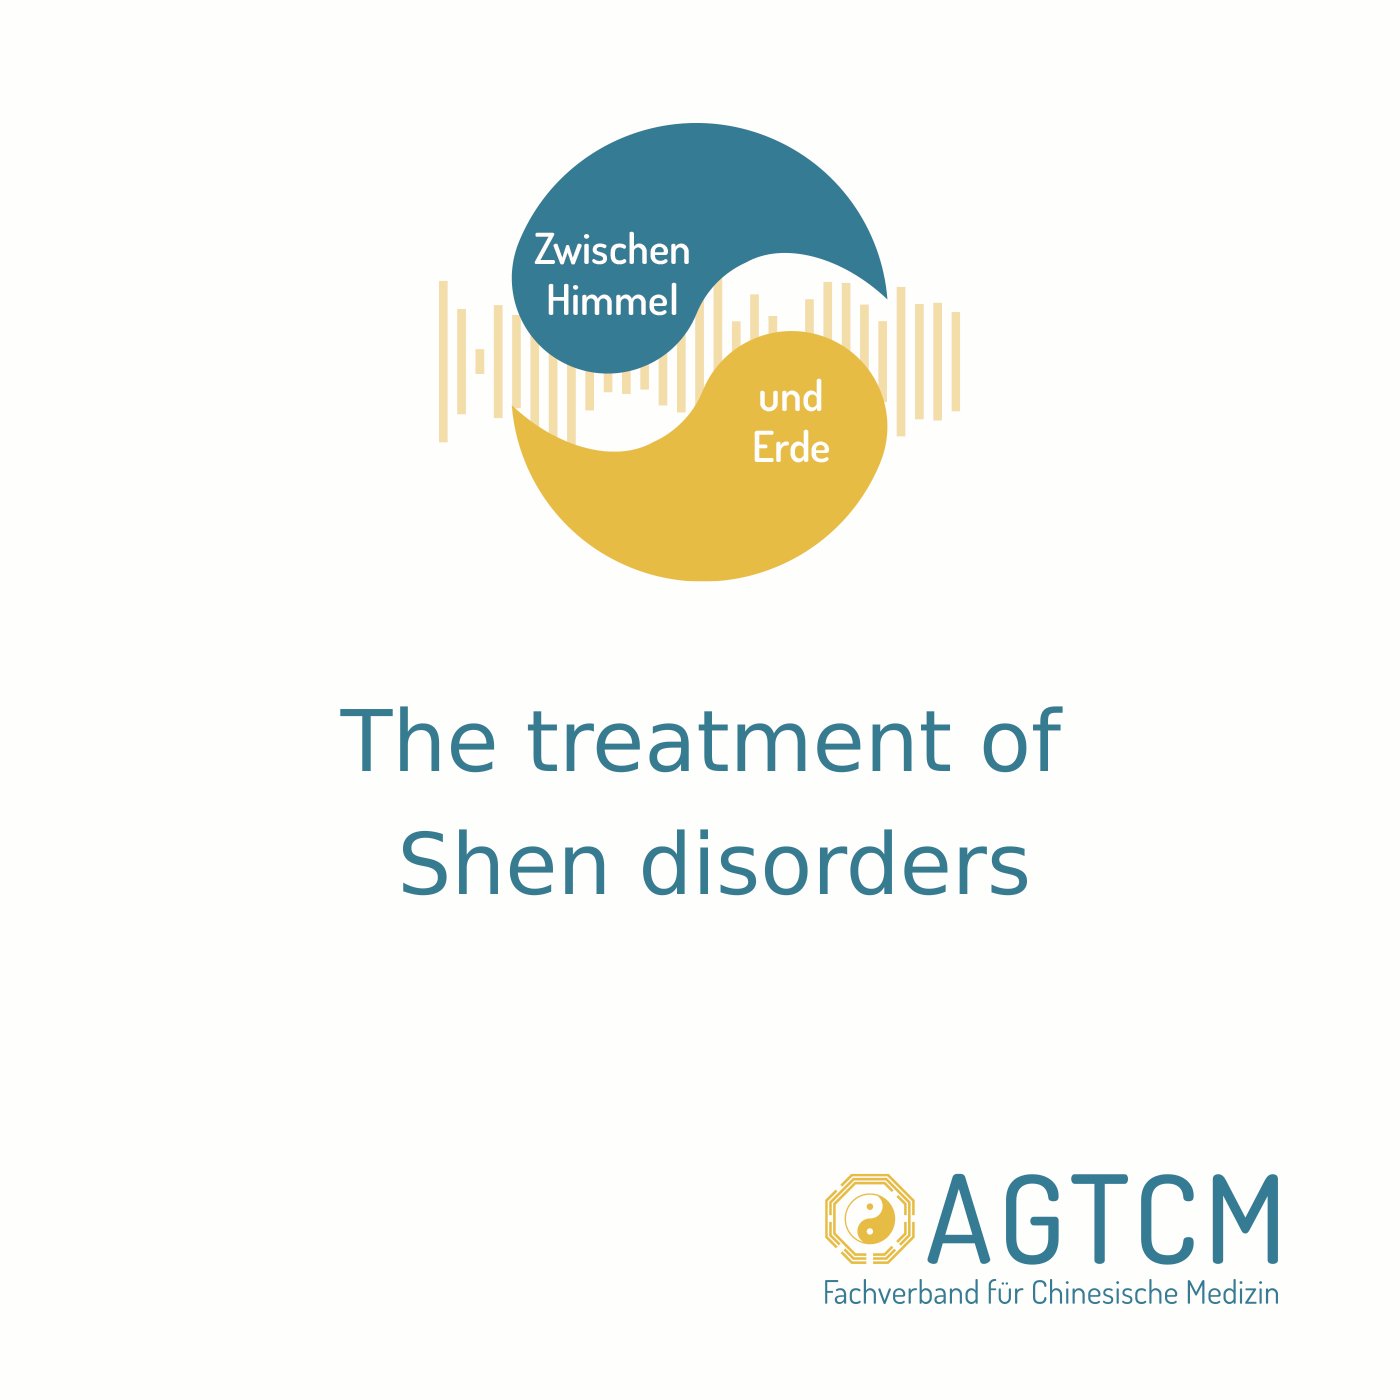 The treatment of Shen disorders